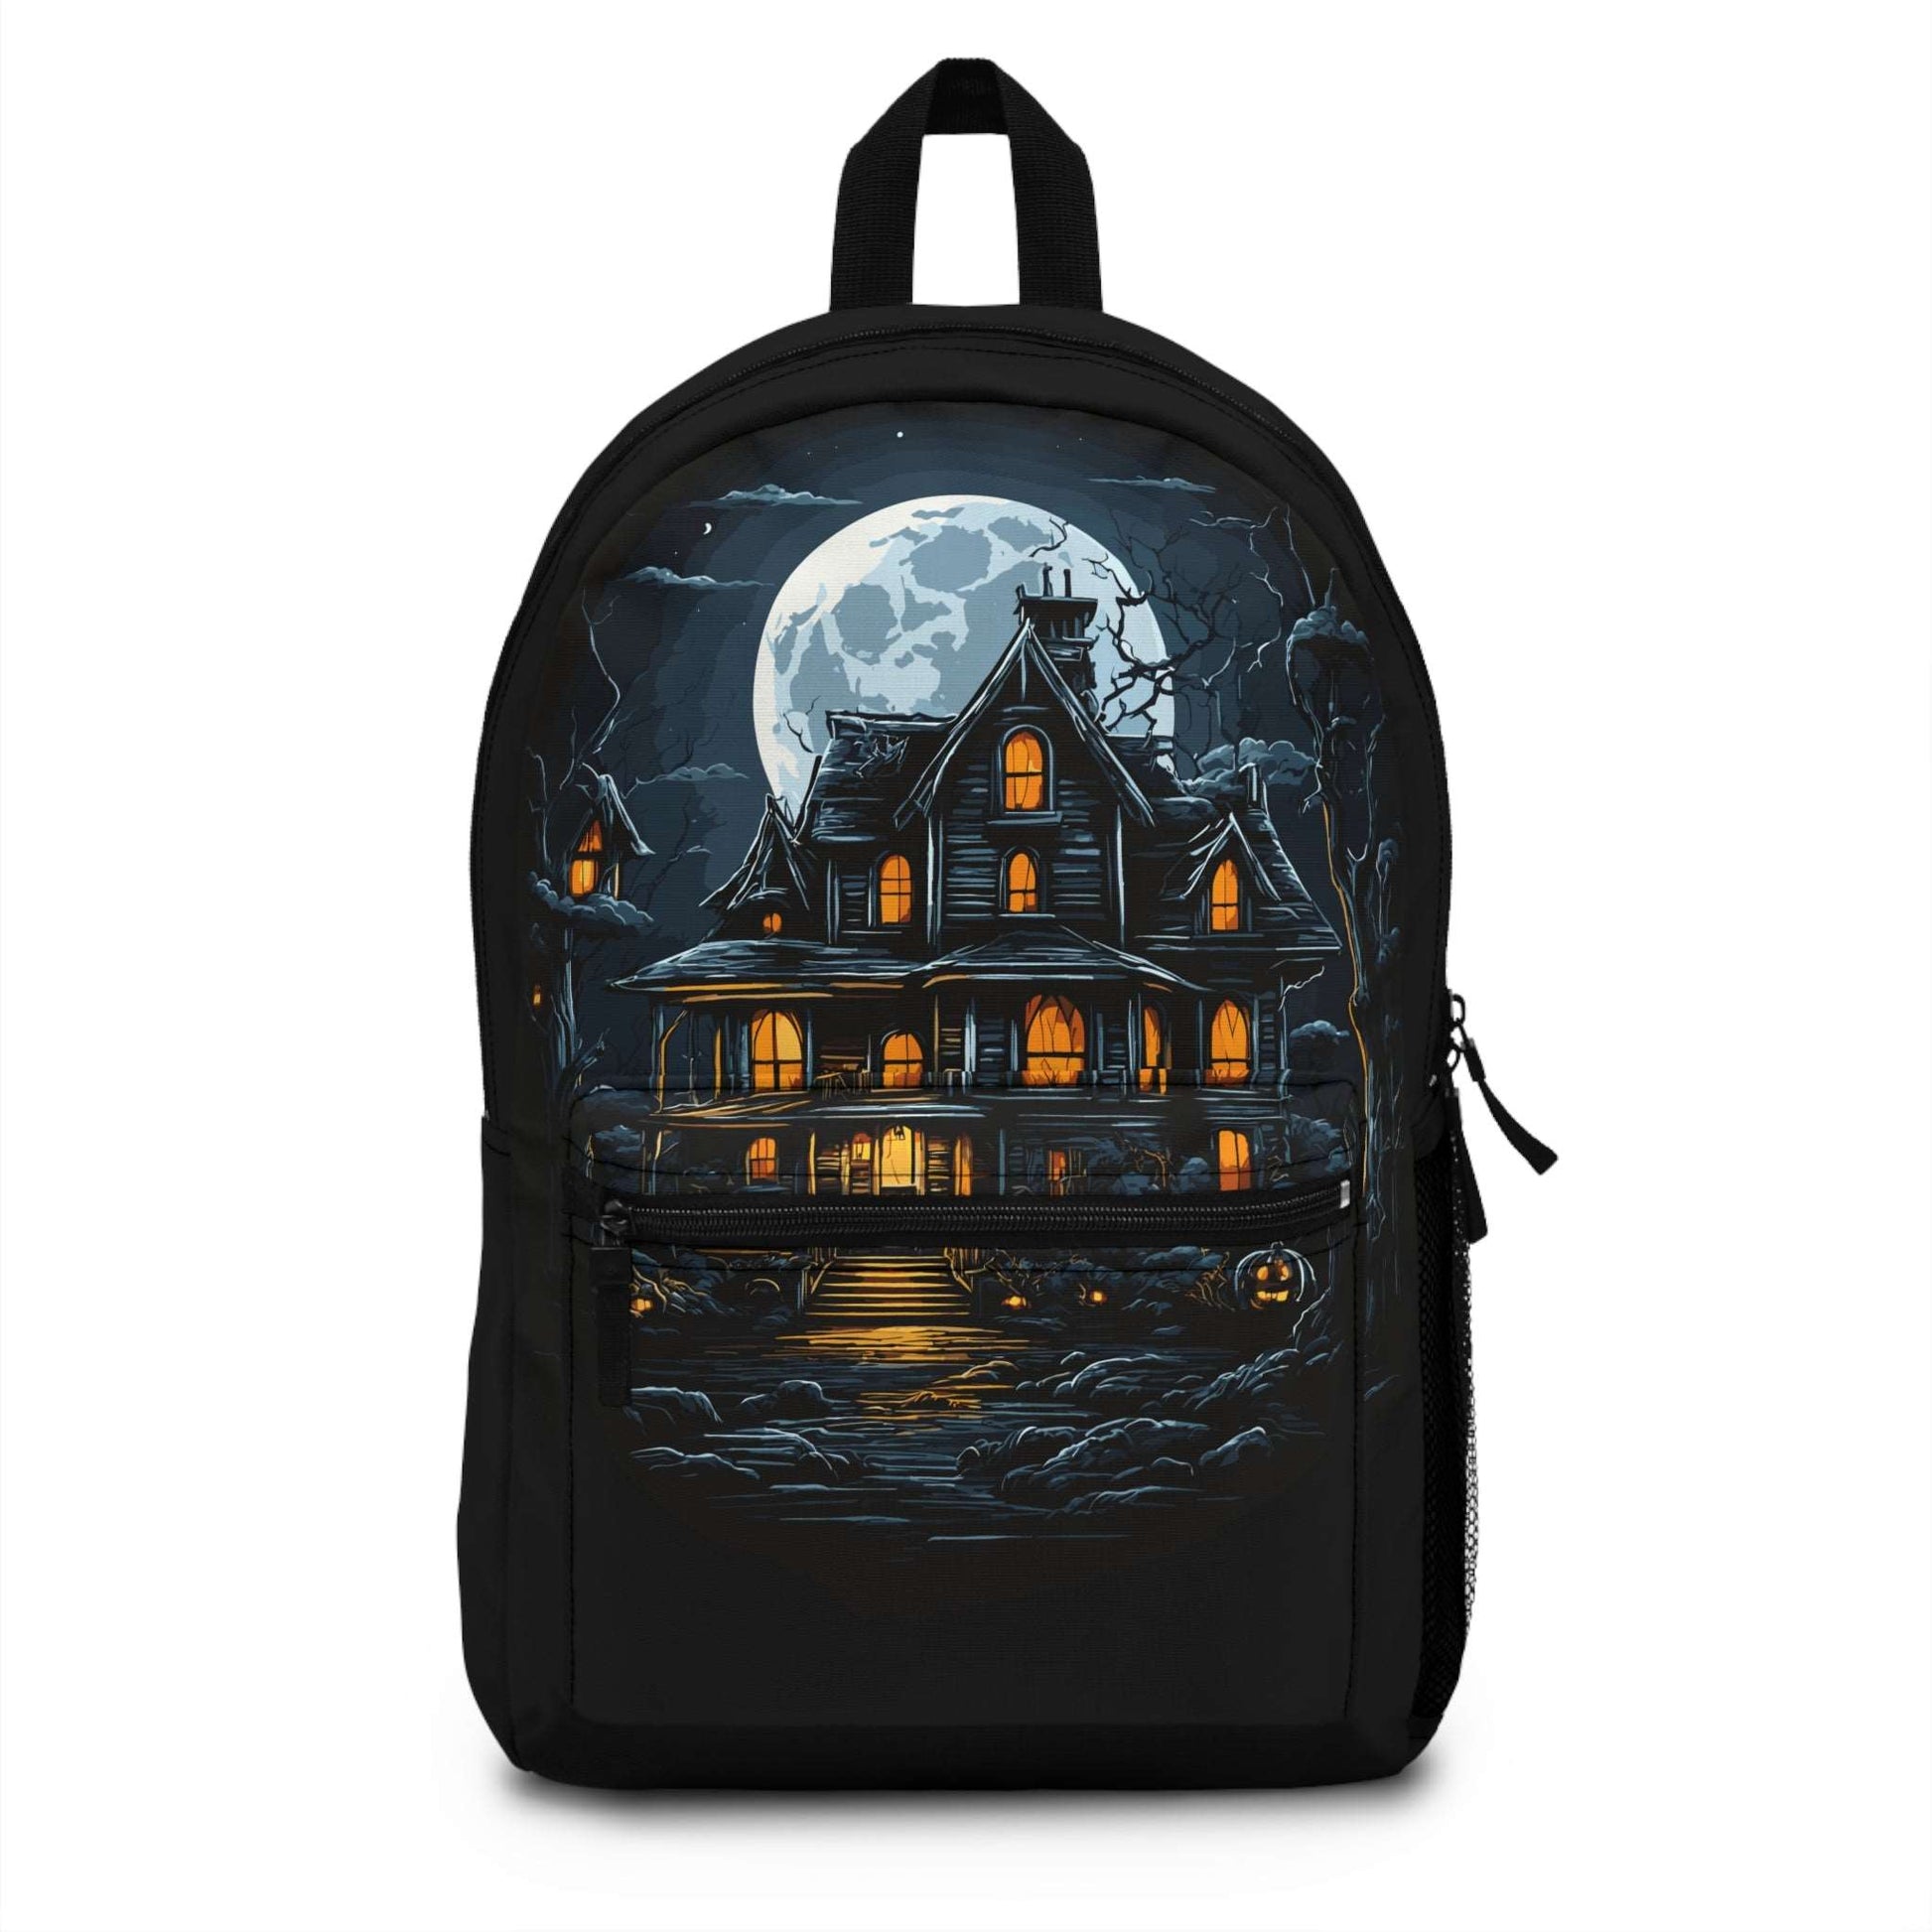 Haunted House Backpack from Fierce Fusion